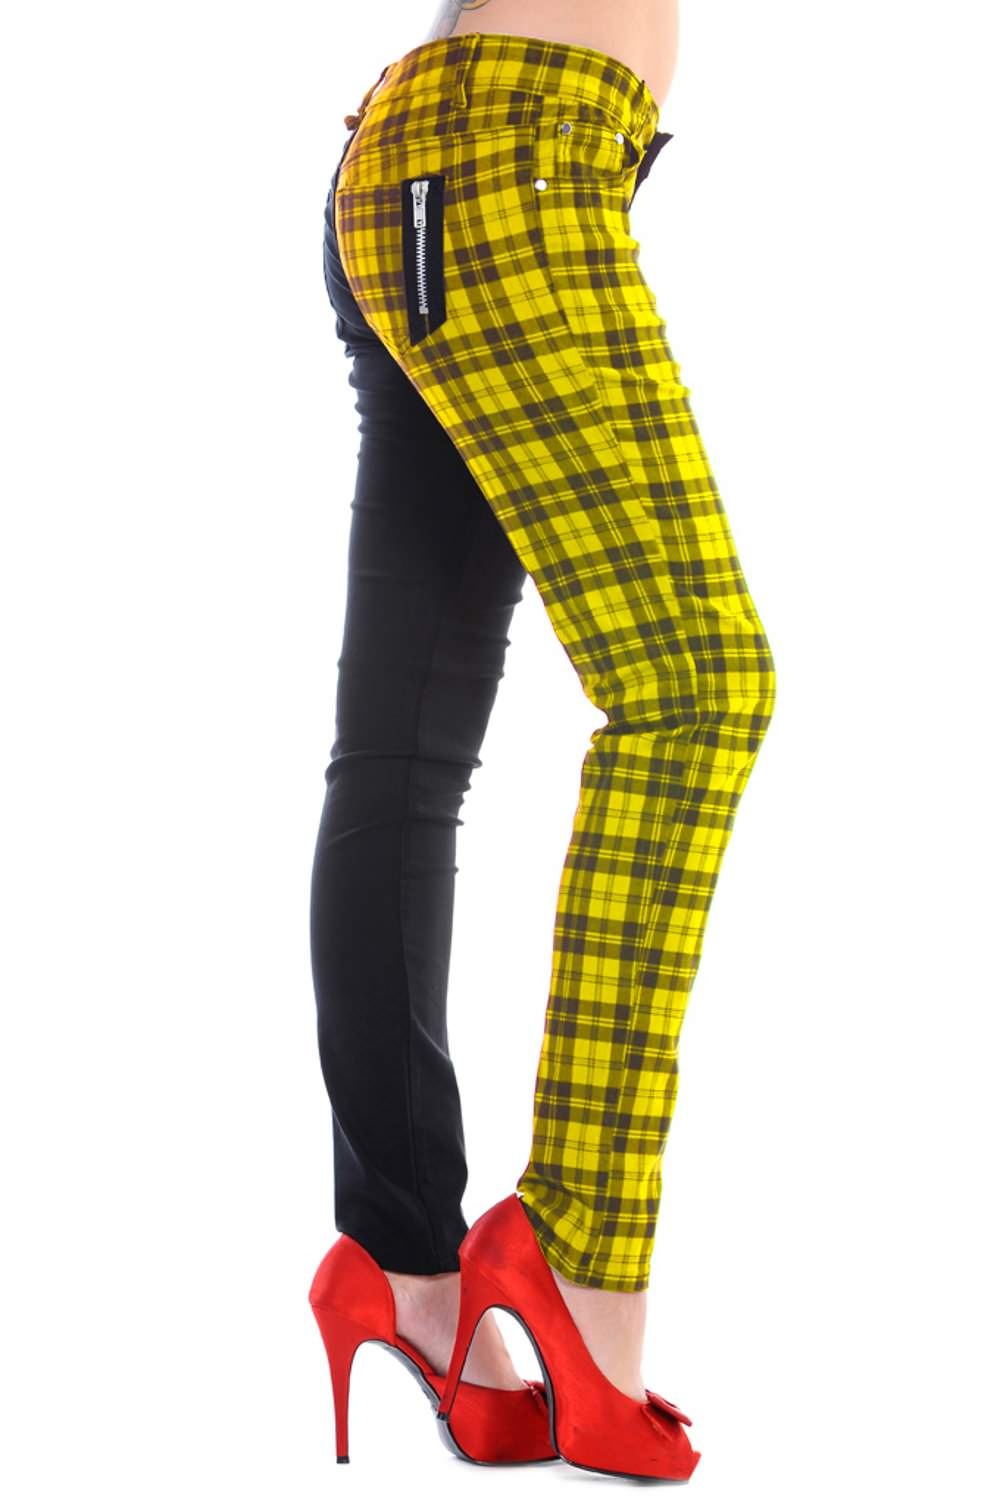 Low rise skinny jeans with one black leg and one yellow check leg